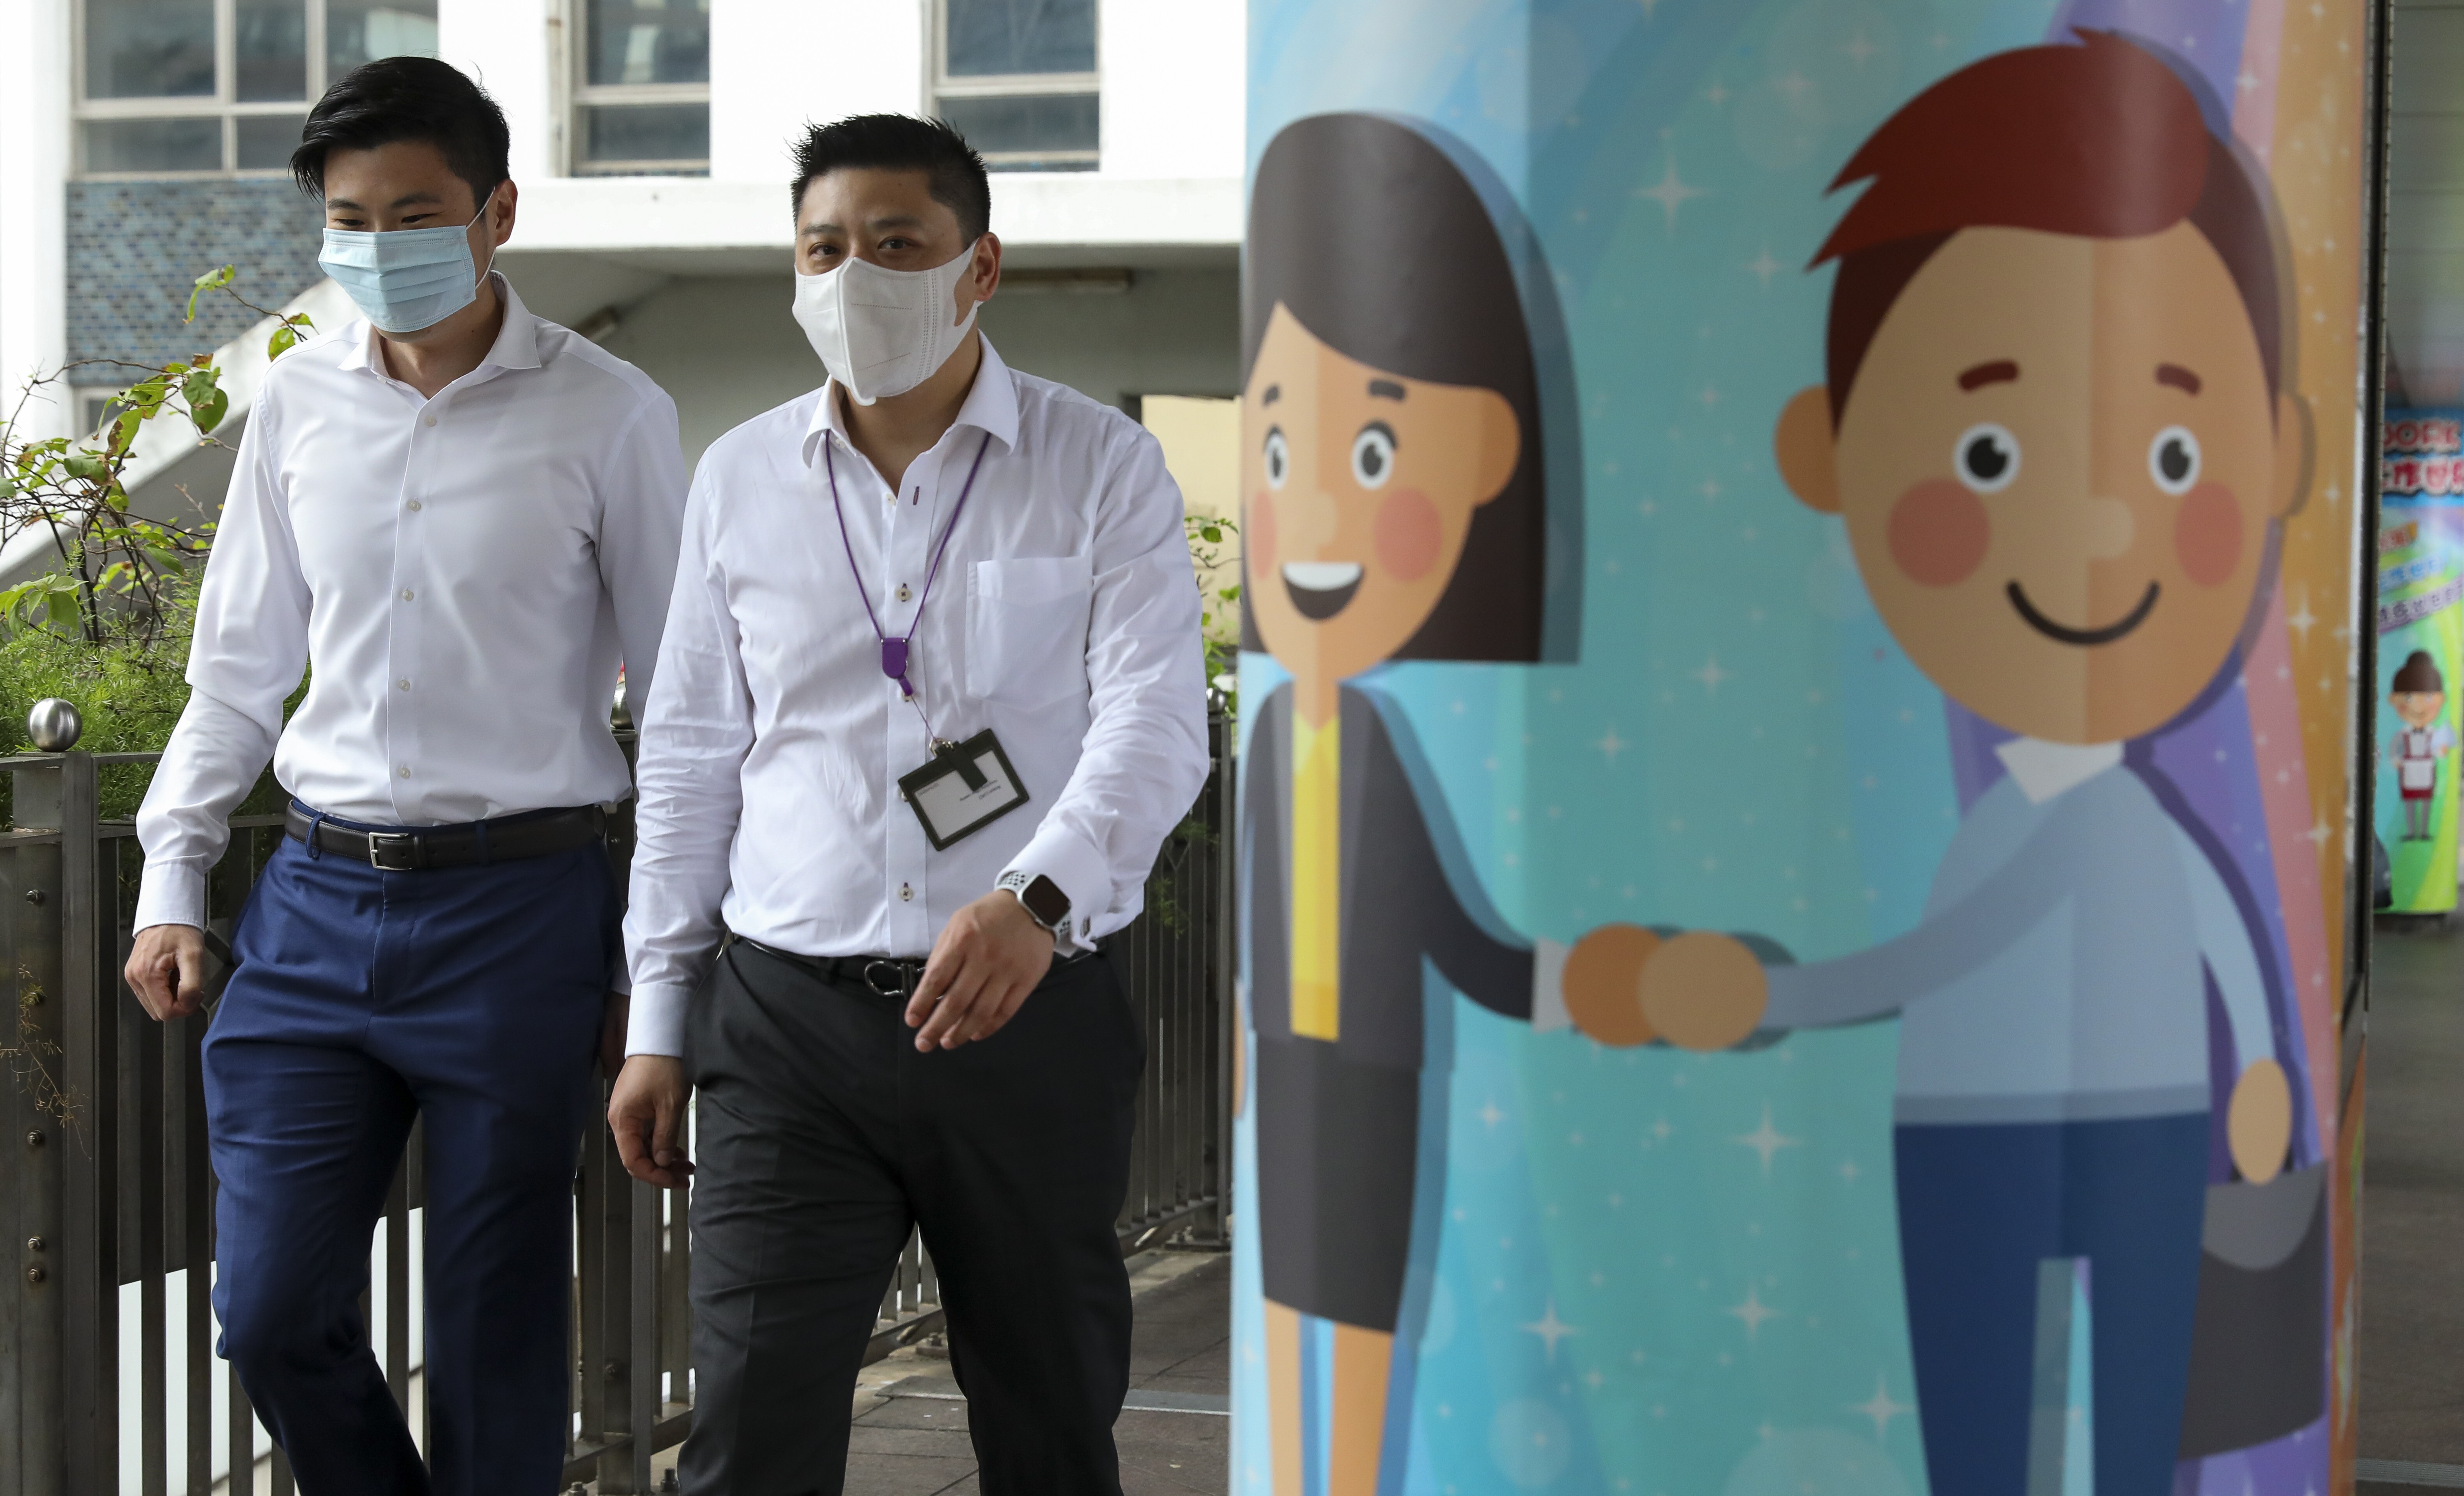 Pedestrians walk past a mural in the Central district of Hong Kong during a coronavirus disease outbreak in the city, on July 20. Photo: handout